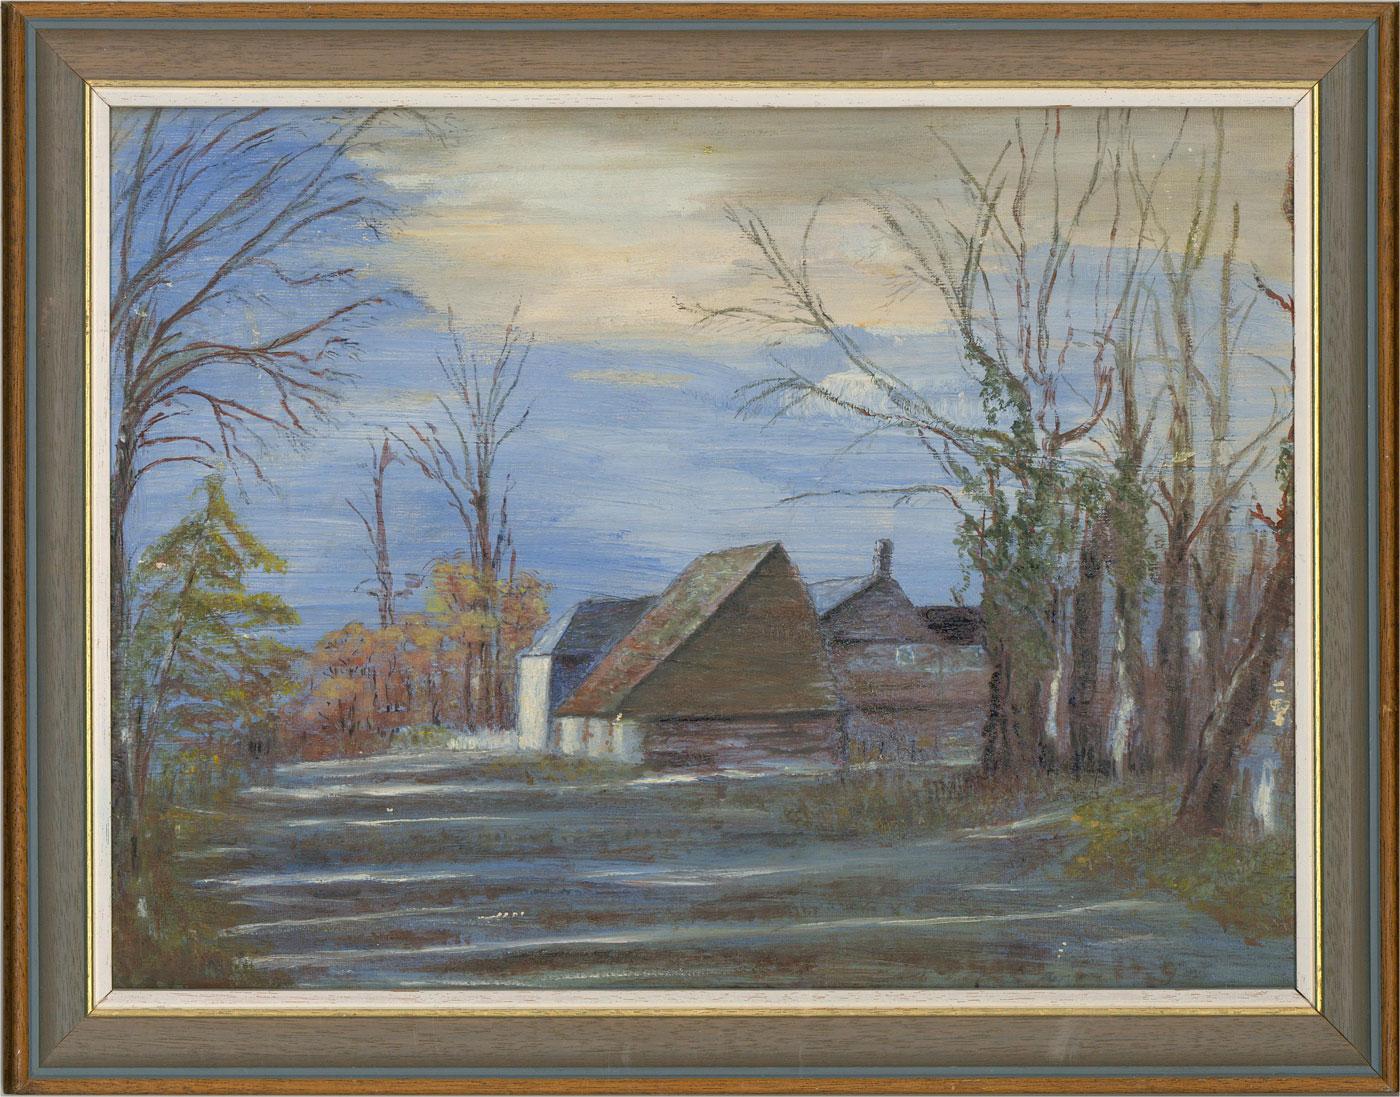 A charming oil painting, depicting a landscape scene in Mattingley, a village and large civil parish in Hampshire, England. Unsigned. Artist's name and location inscribed on the reverse. Presented in a painted wooden frame, as shown. On canvas